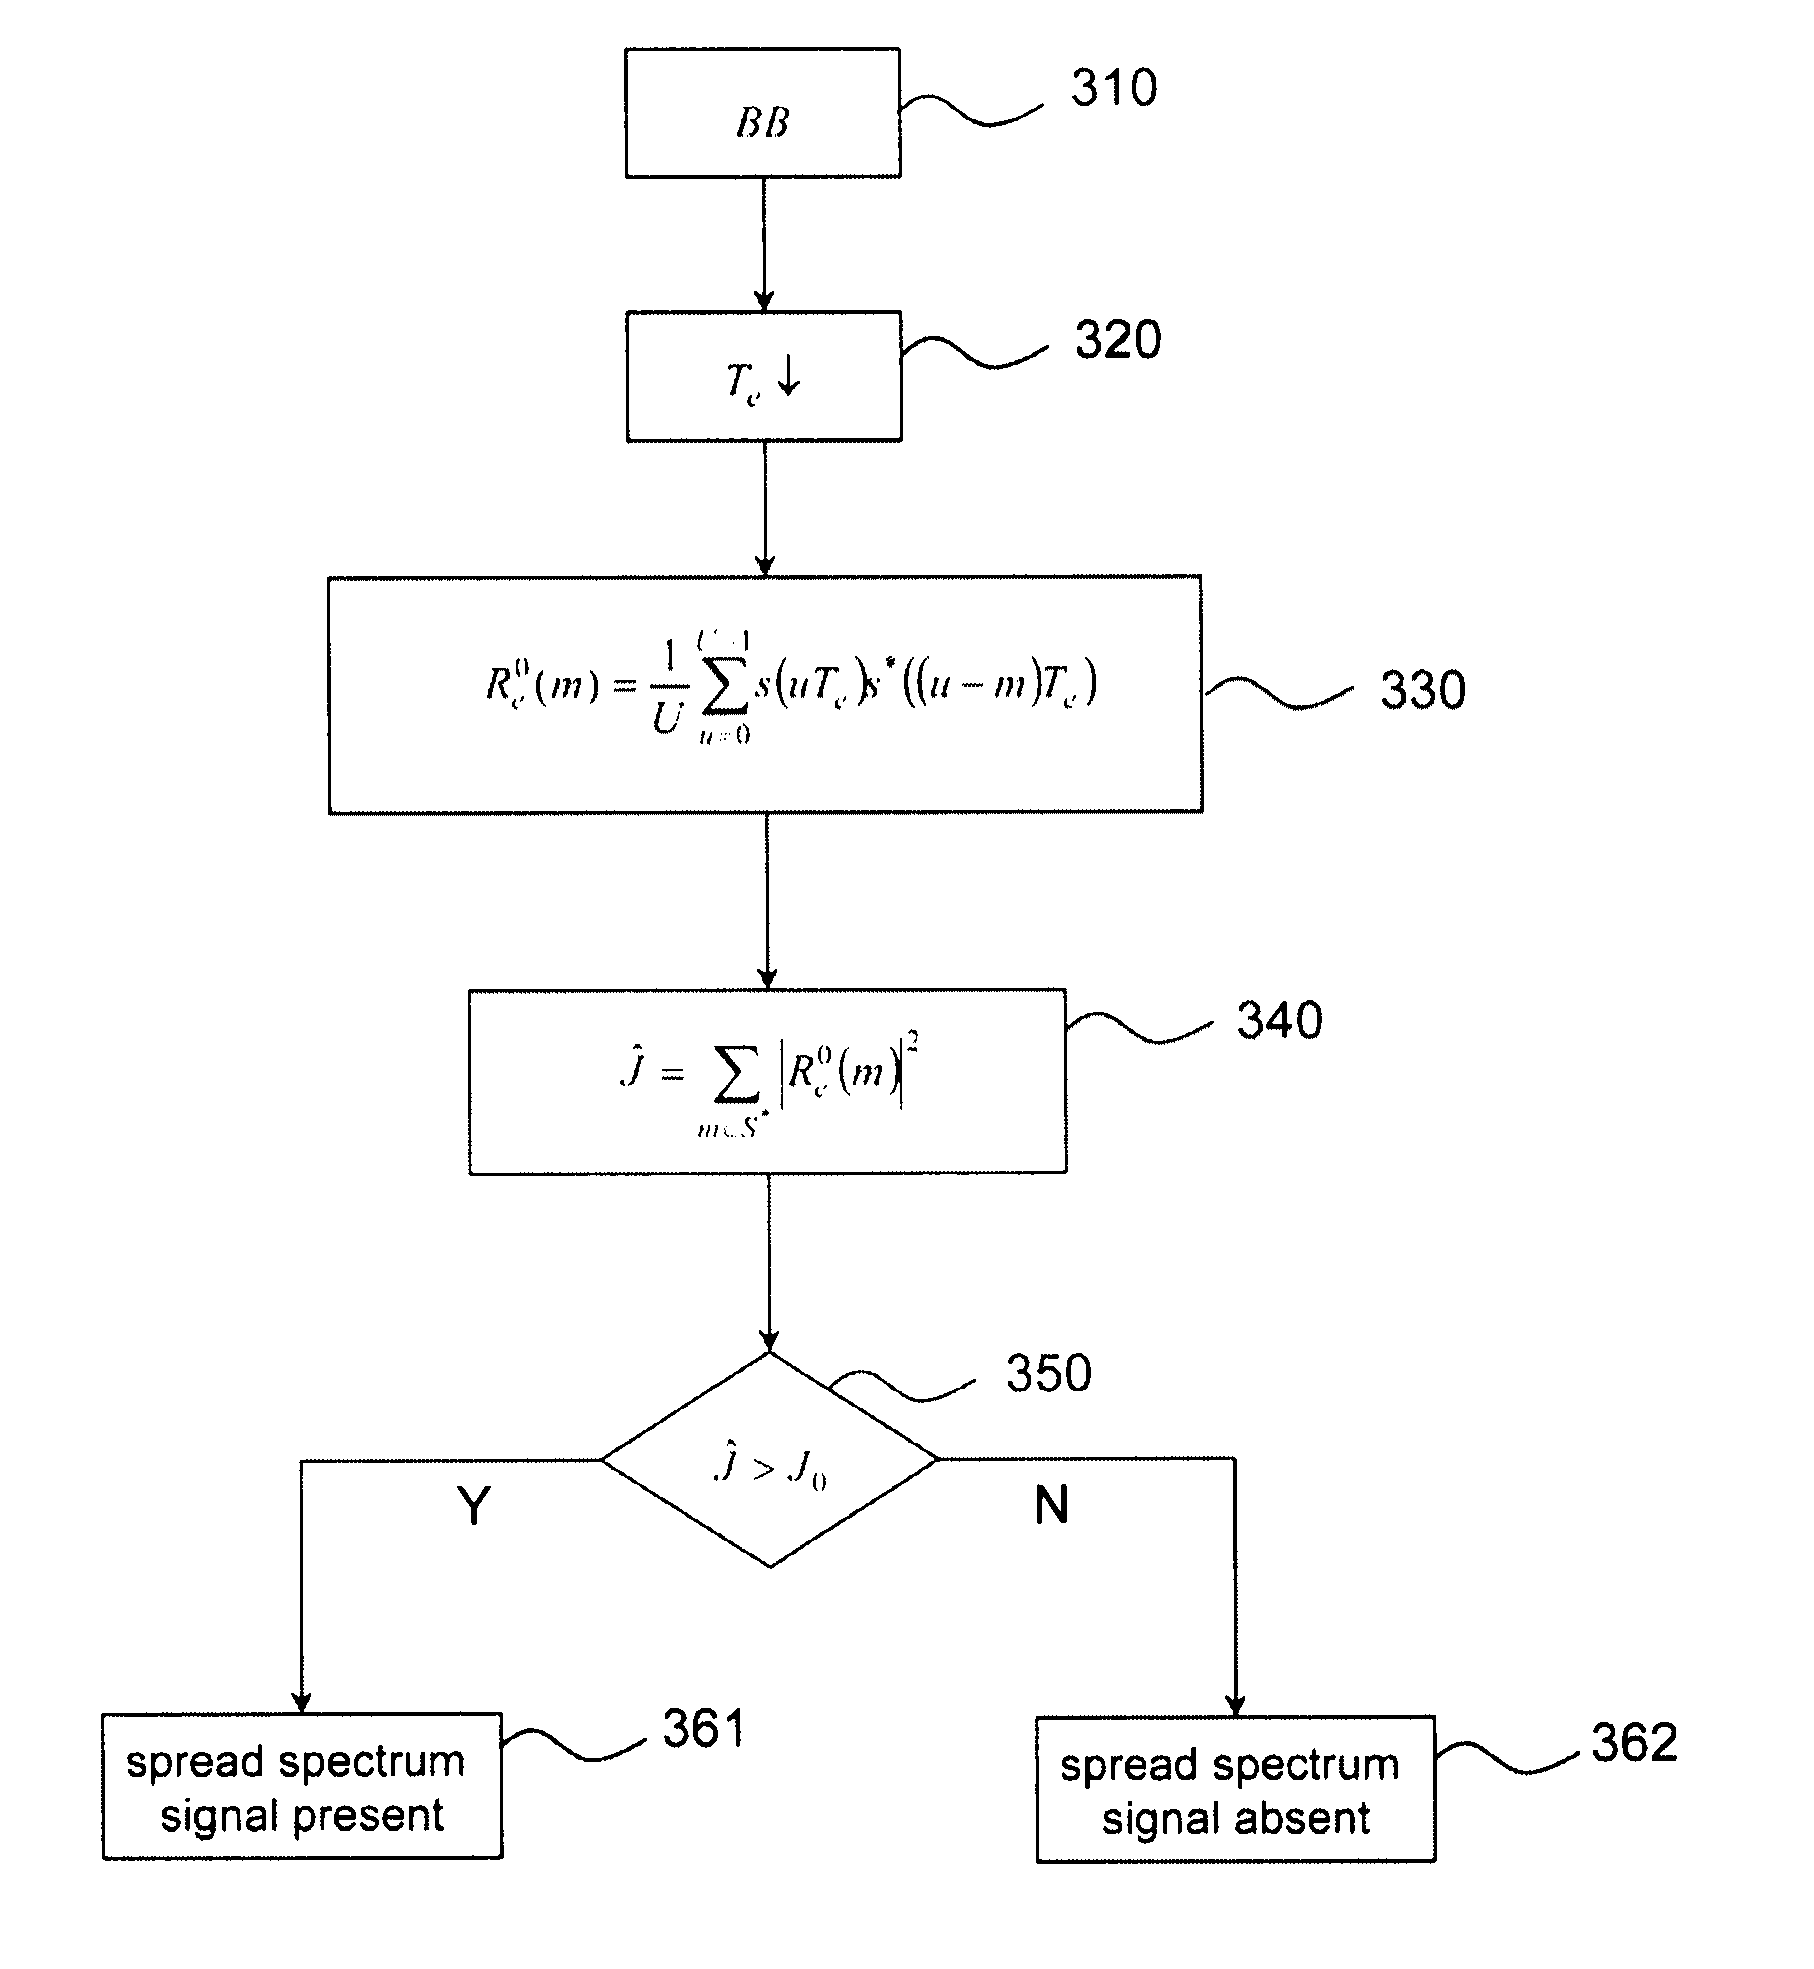 Method for detecting the presence of spread spectrum signals